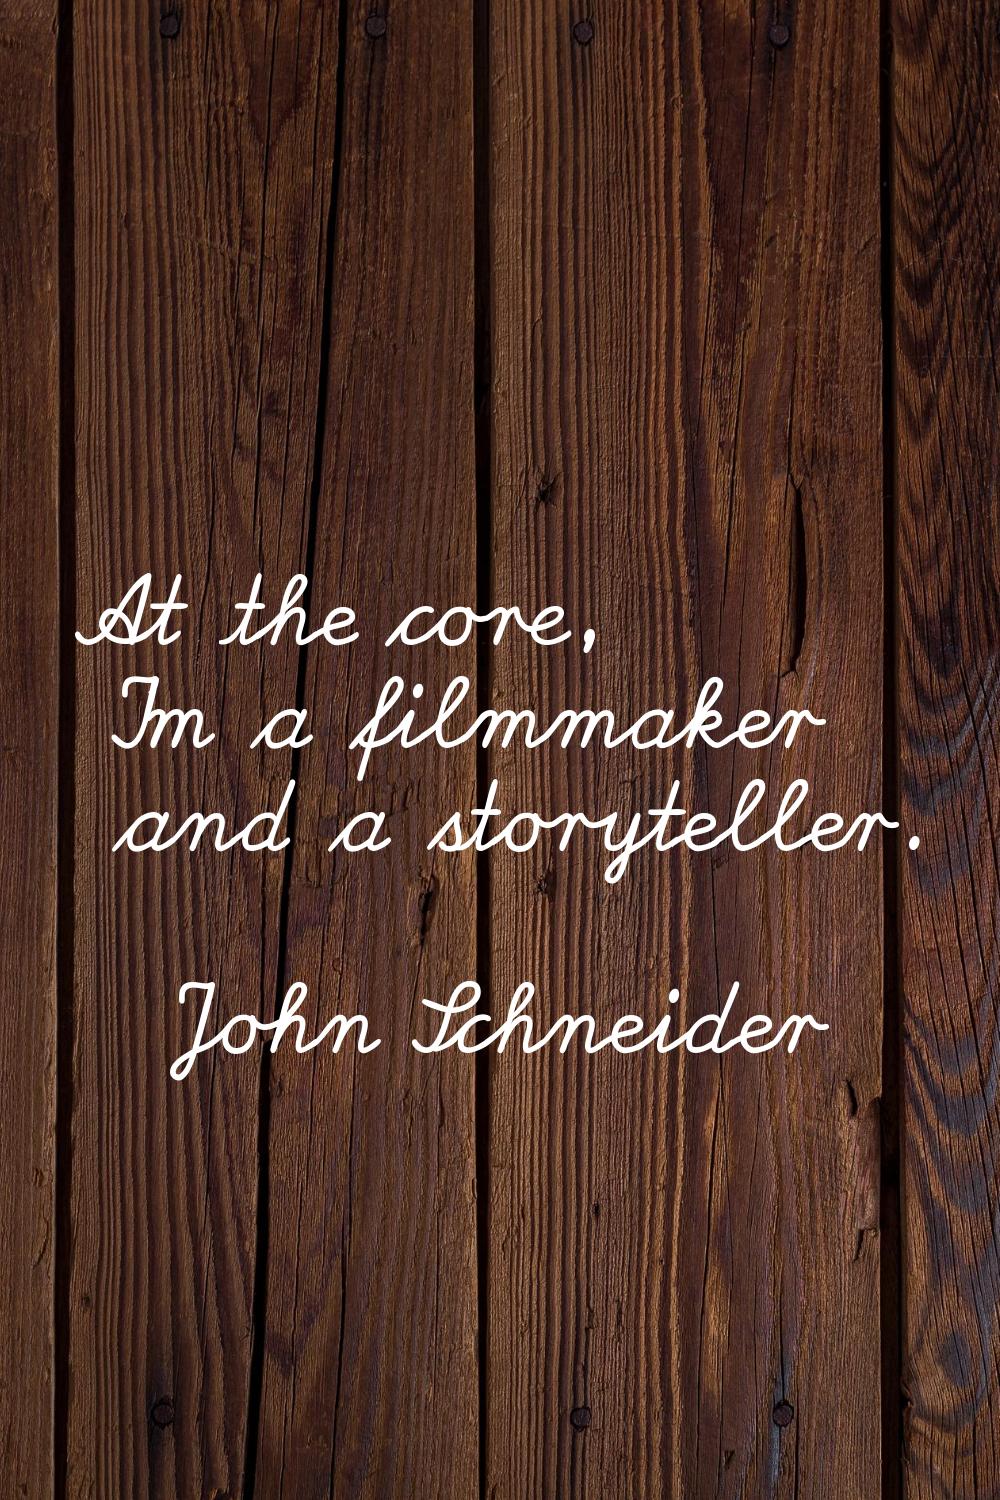 At the core, I'm a filmmaker and a storyteller.